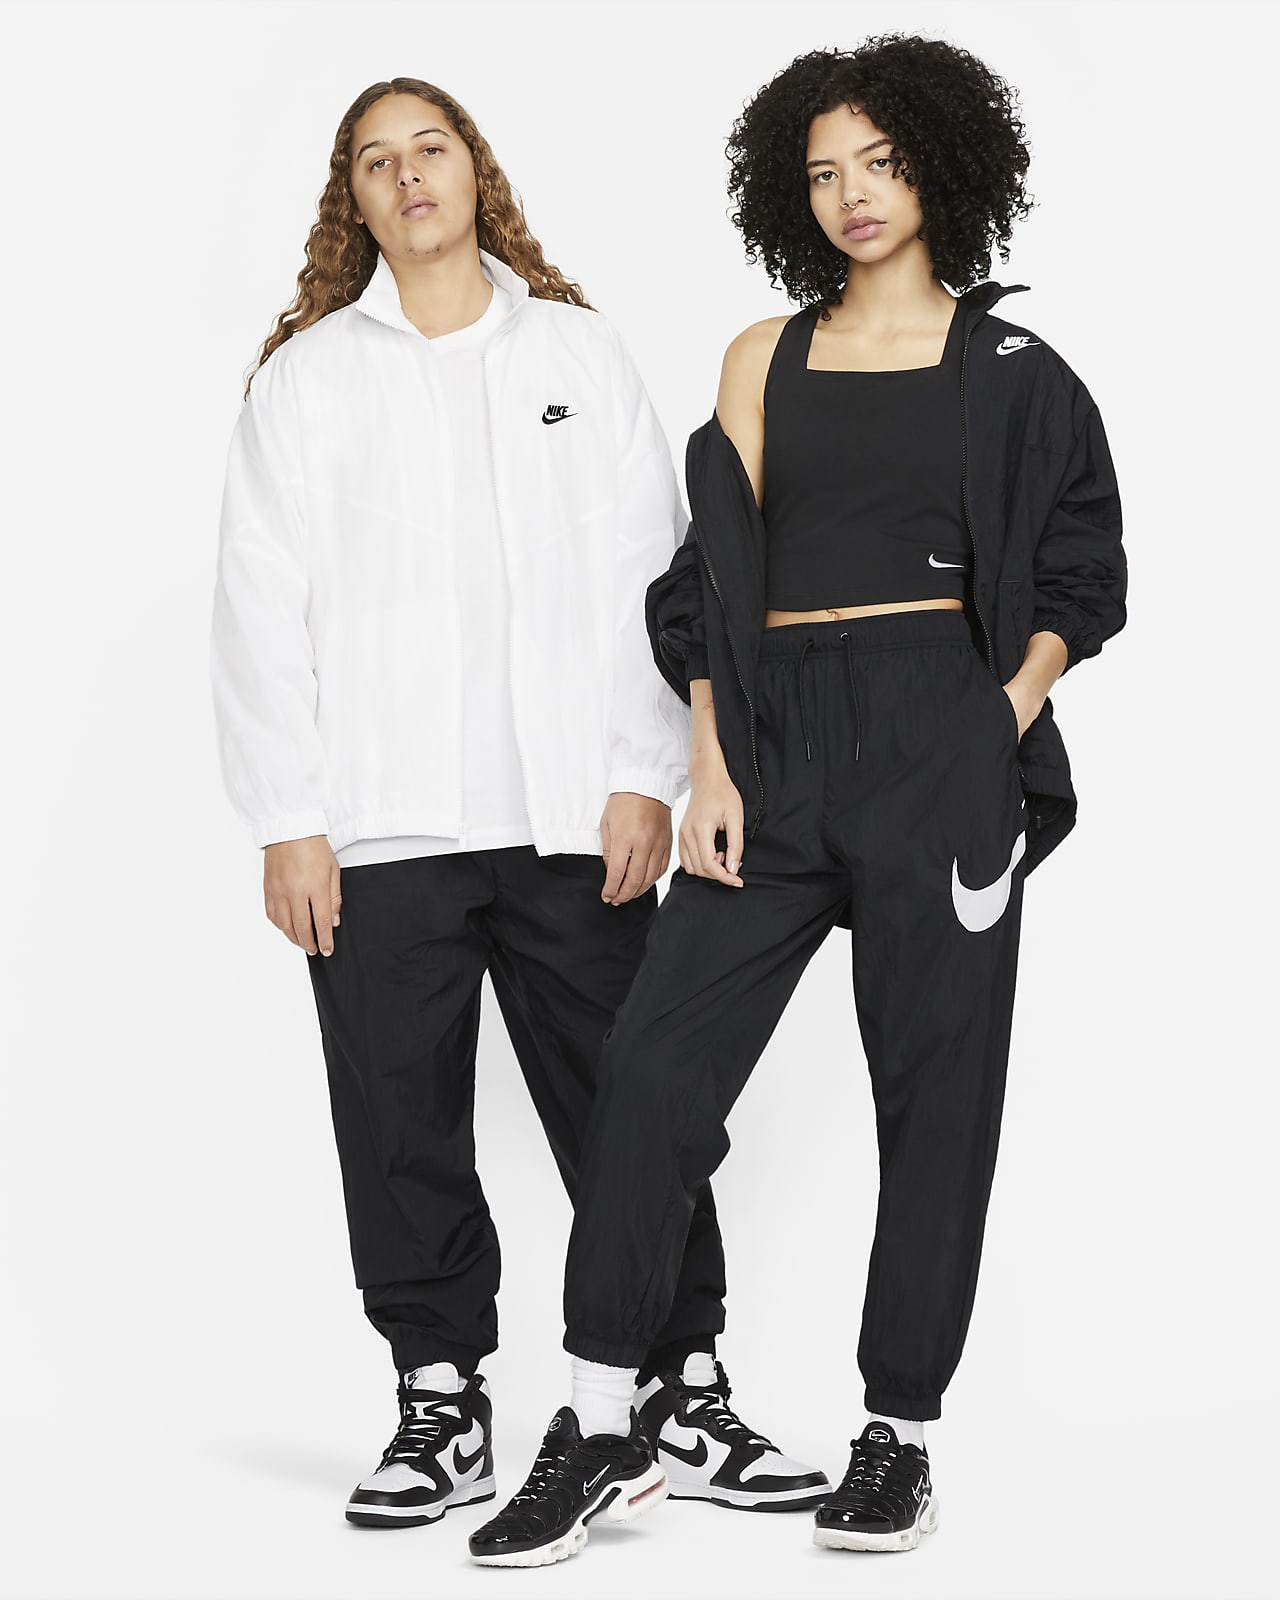 https://static.nike.com/a/images/t_PDP_1280_v1/f_auto,q_auto:eco/fd3db309-e5b2-4df7-bc3f-d6fd7e188479/sportswear-essential-mid-rise-trousers-L7mfNs.png